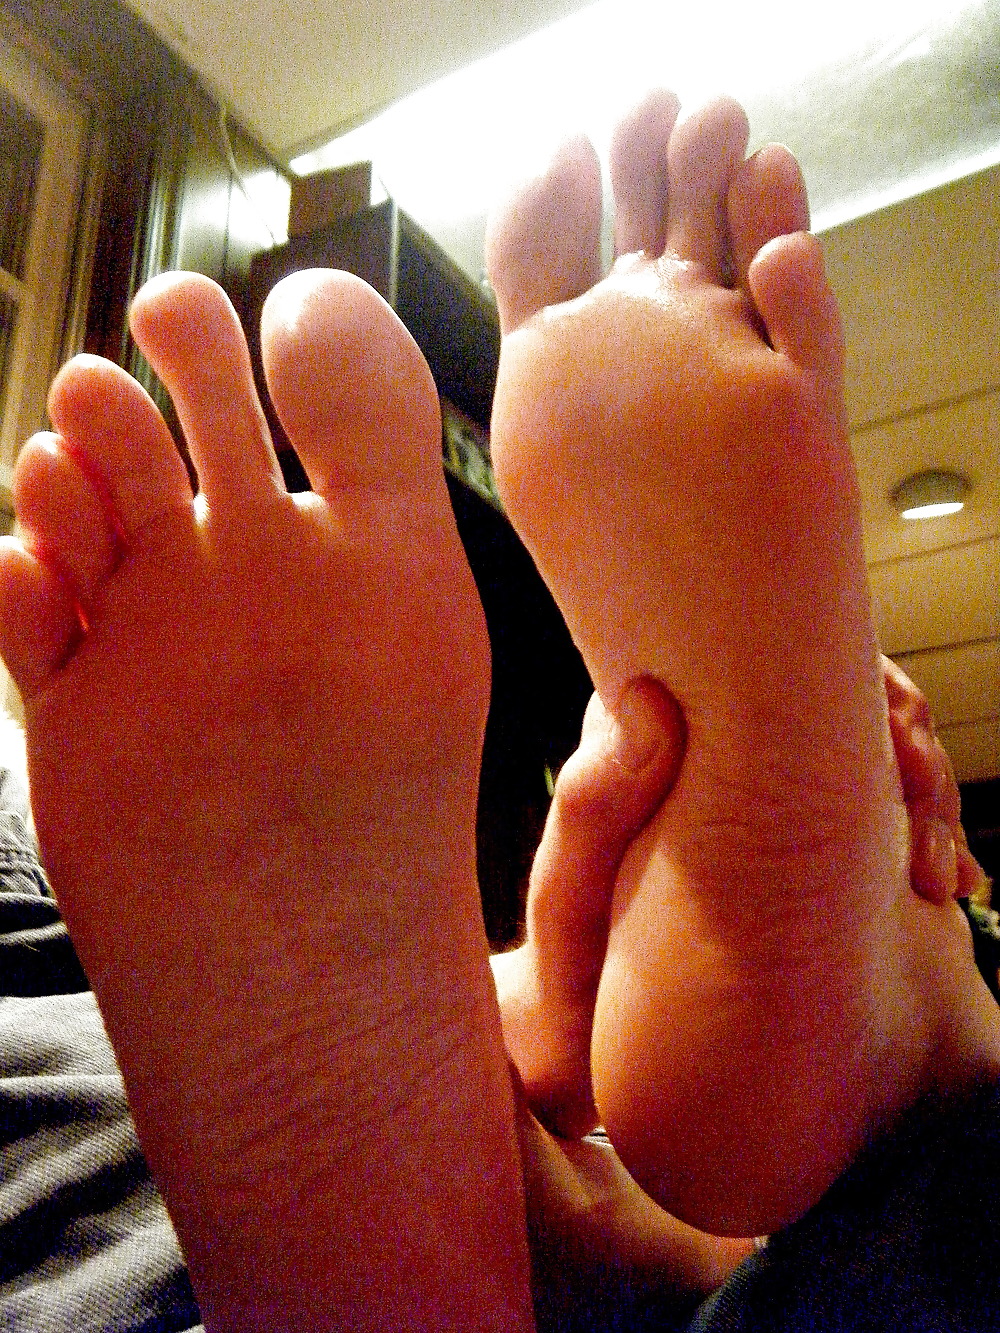 More candid shots of my wife's exquisite feet and toes porn pictures